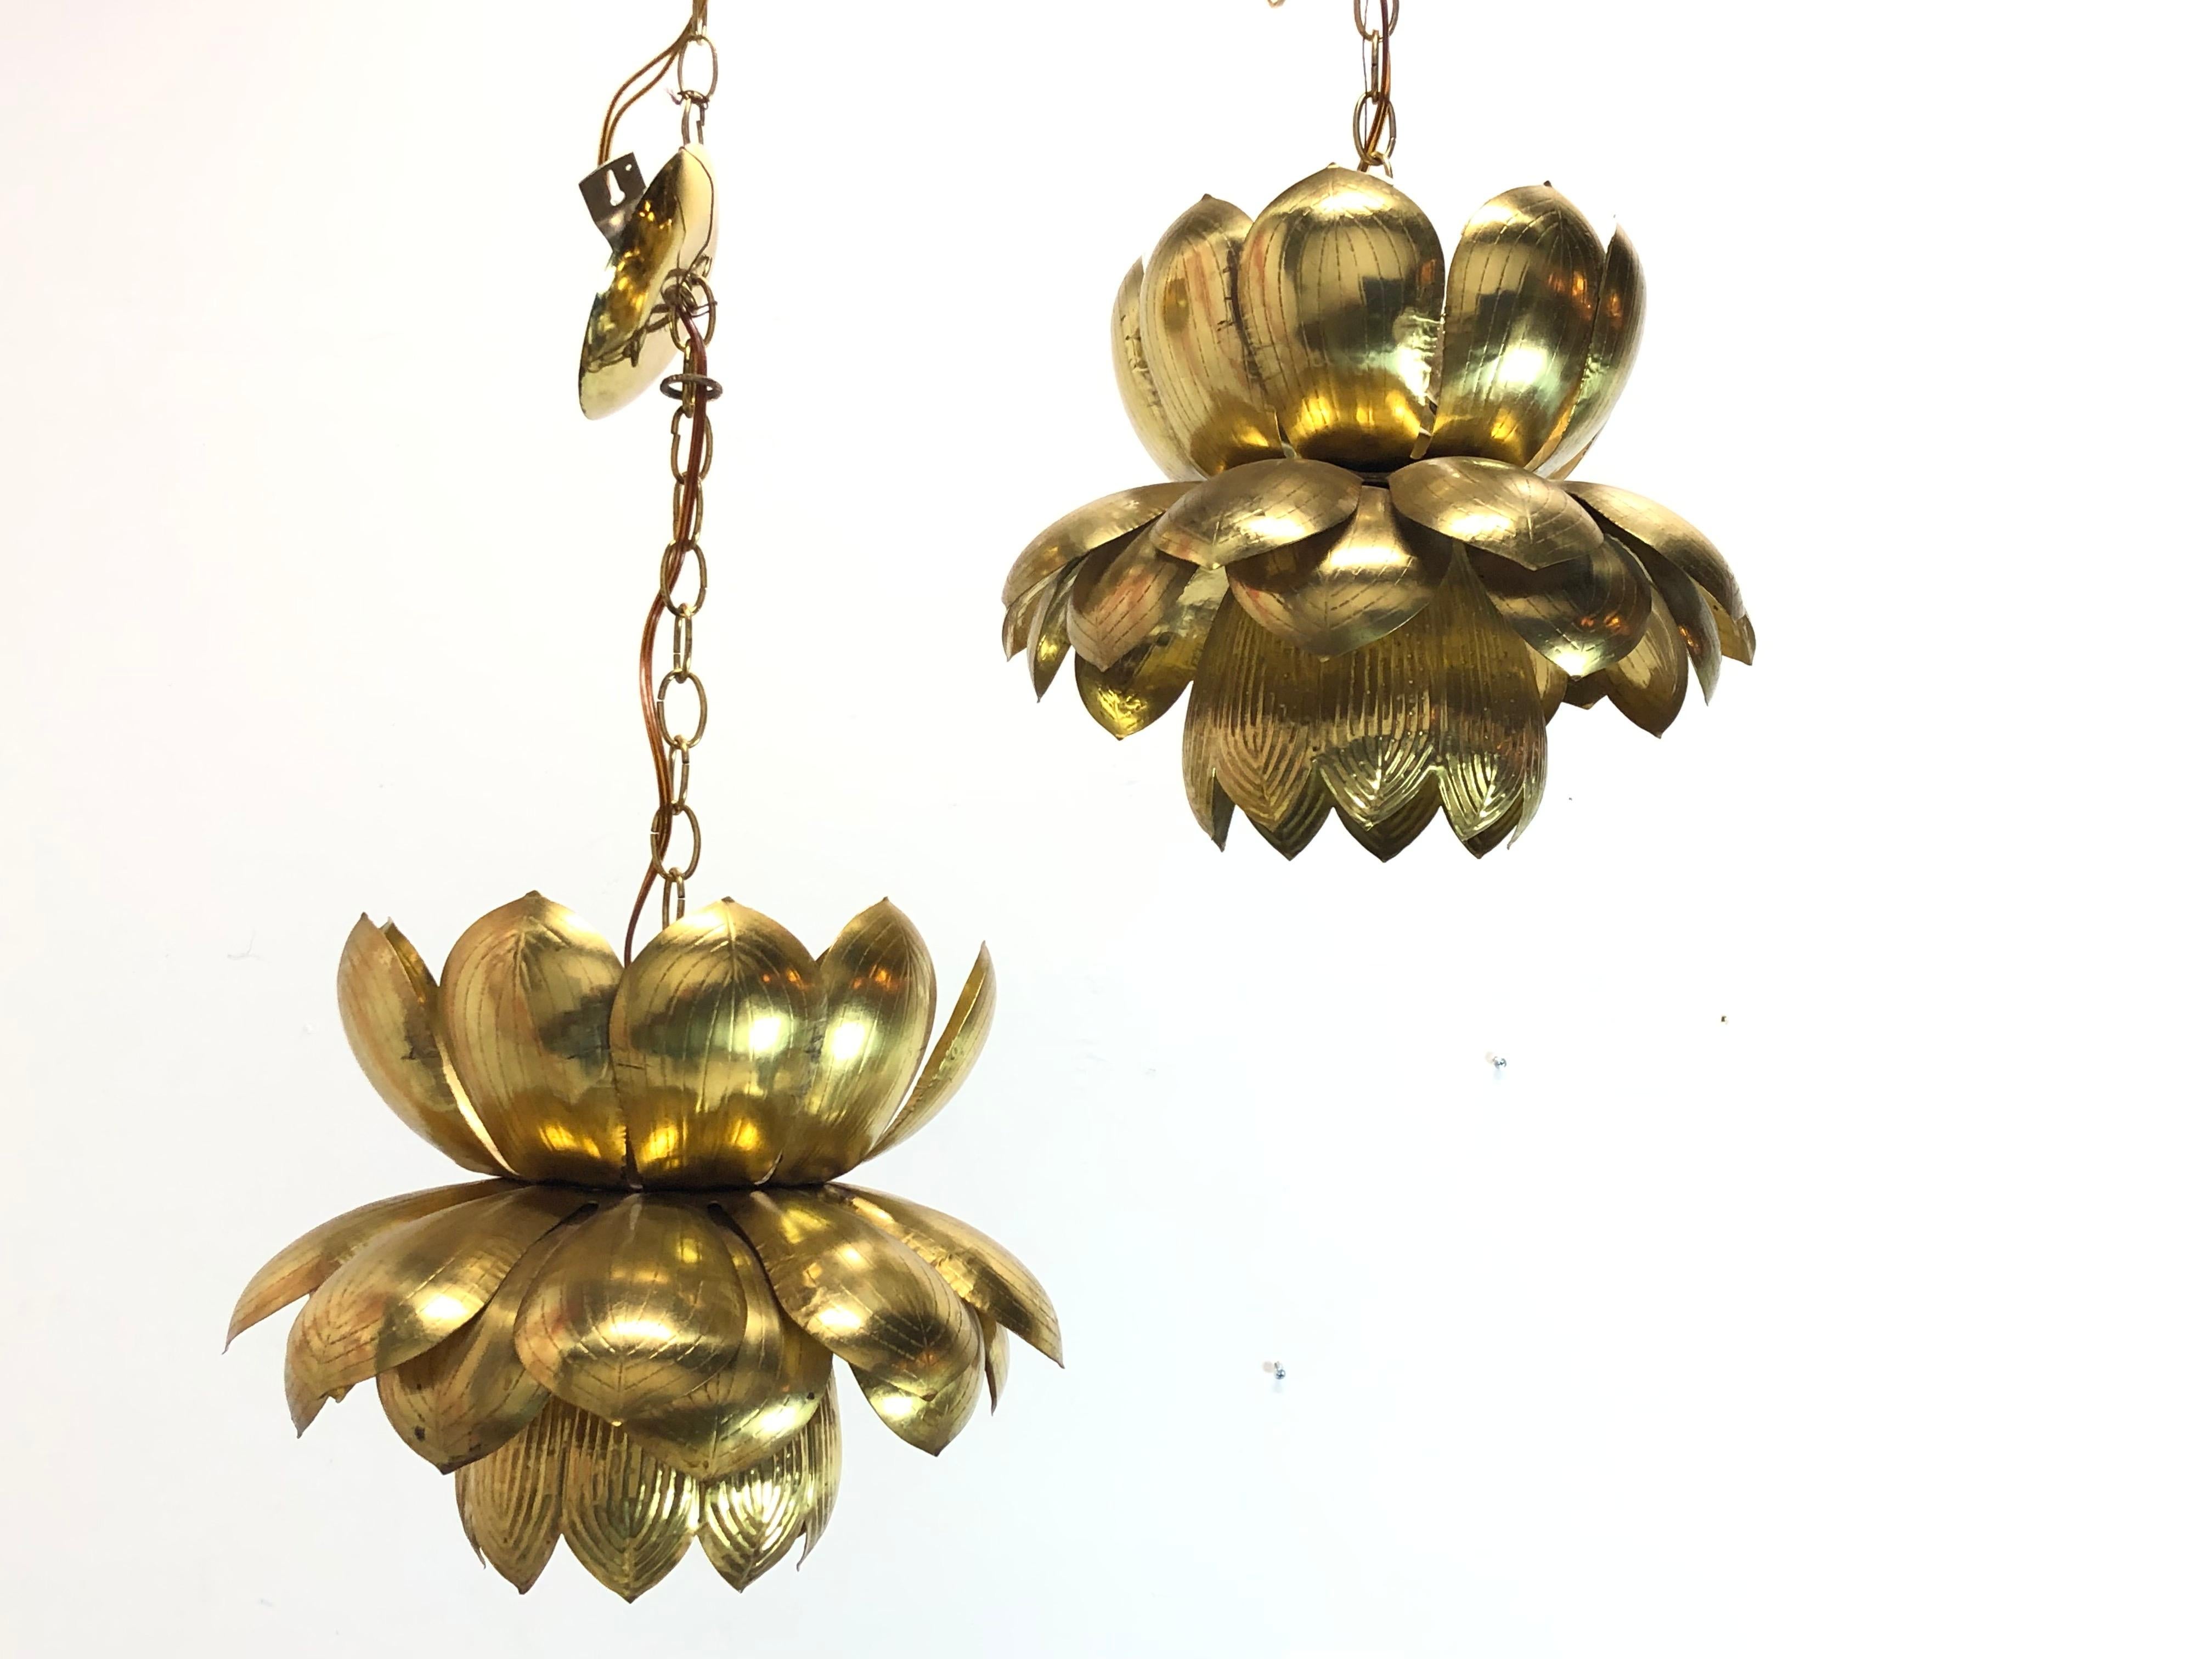 Pair of large brass lotus pendants. Pendants are in good vintage condition with visible oxidation of brass. Original wiring.

Dimensions:
16.5